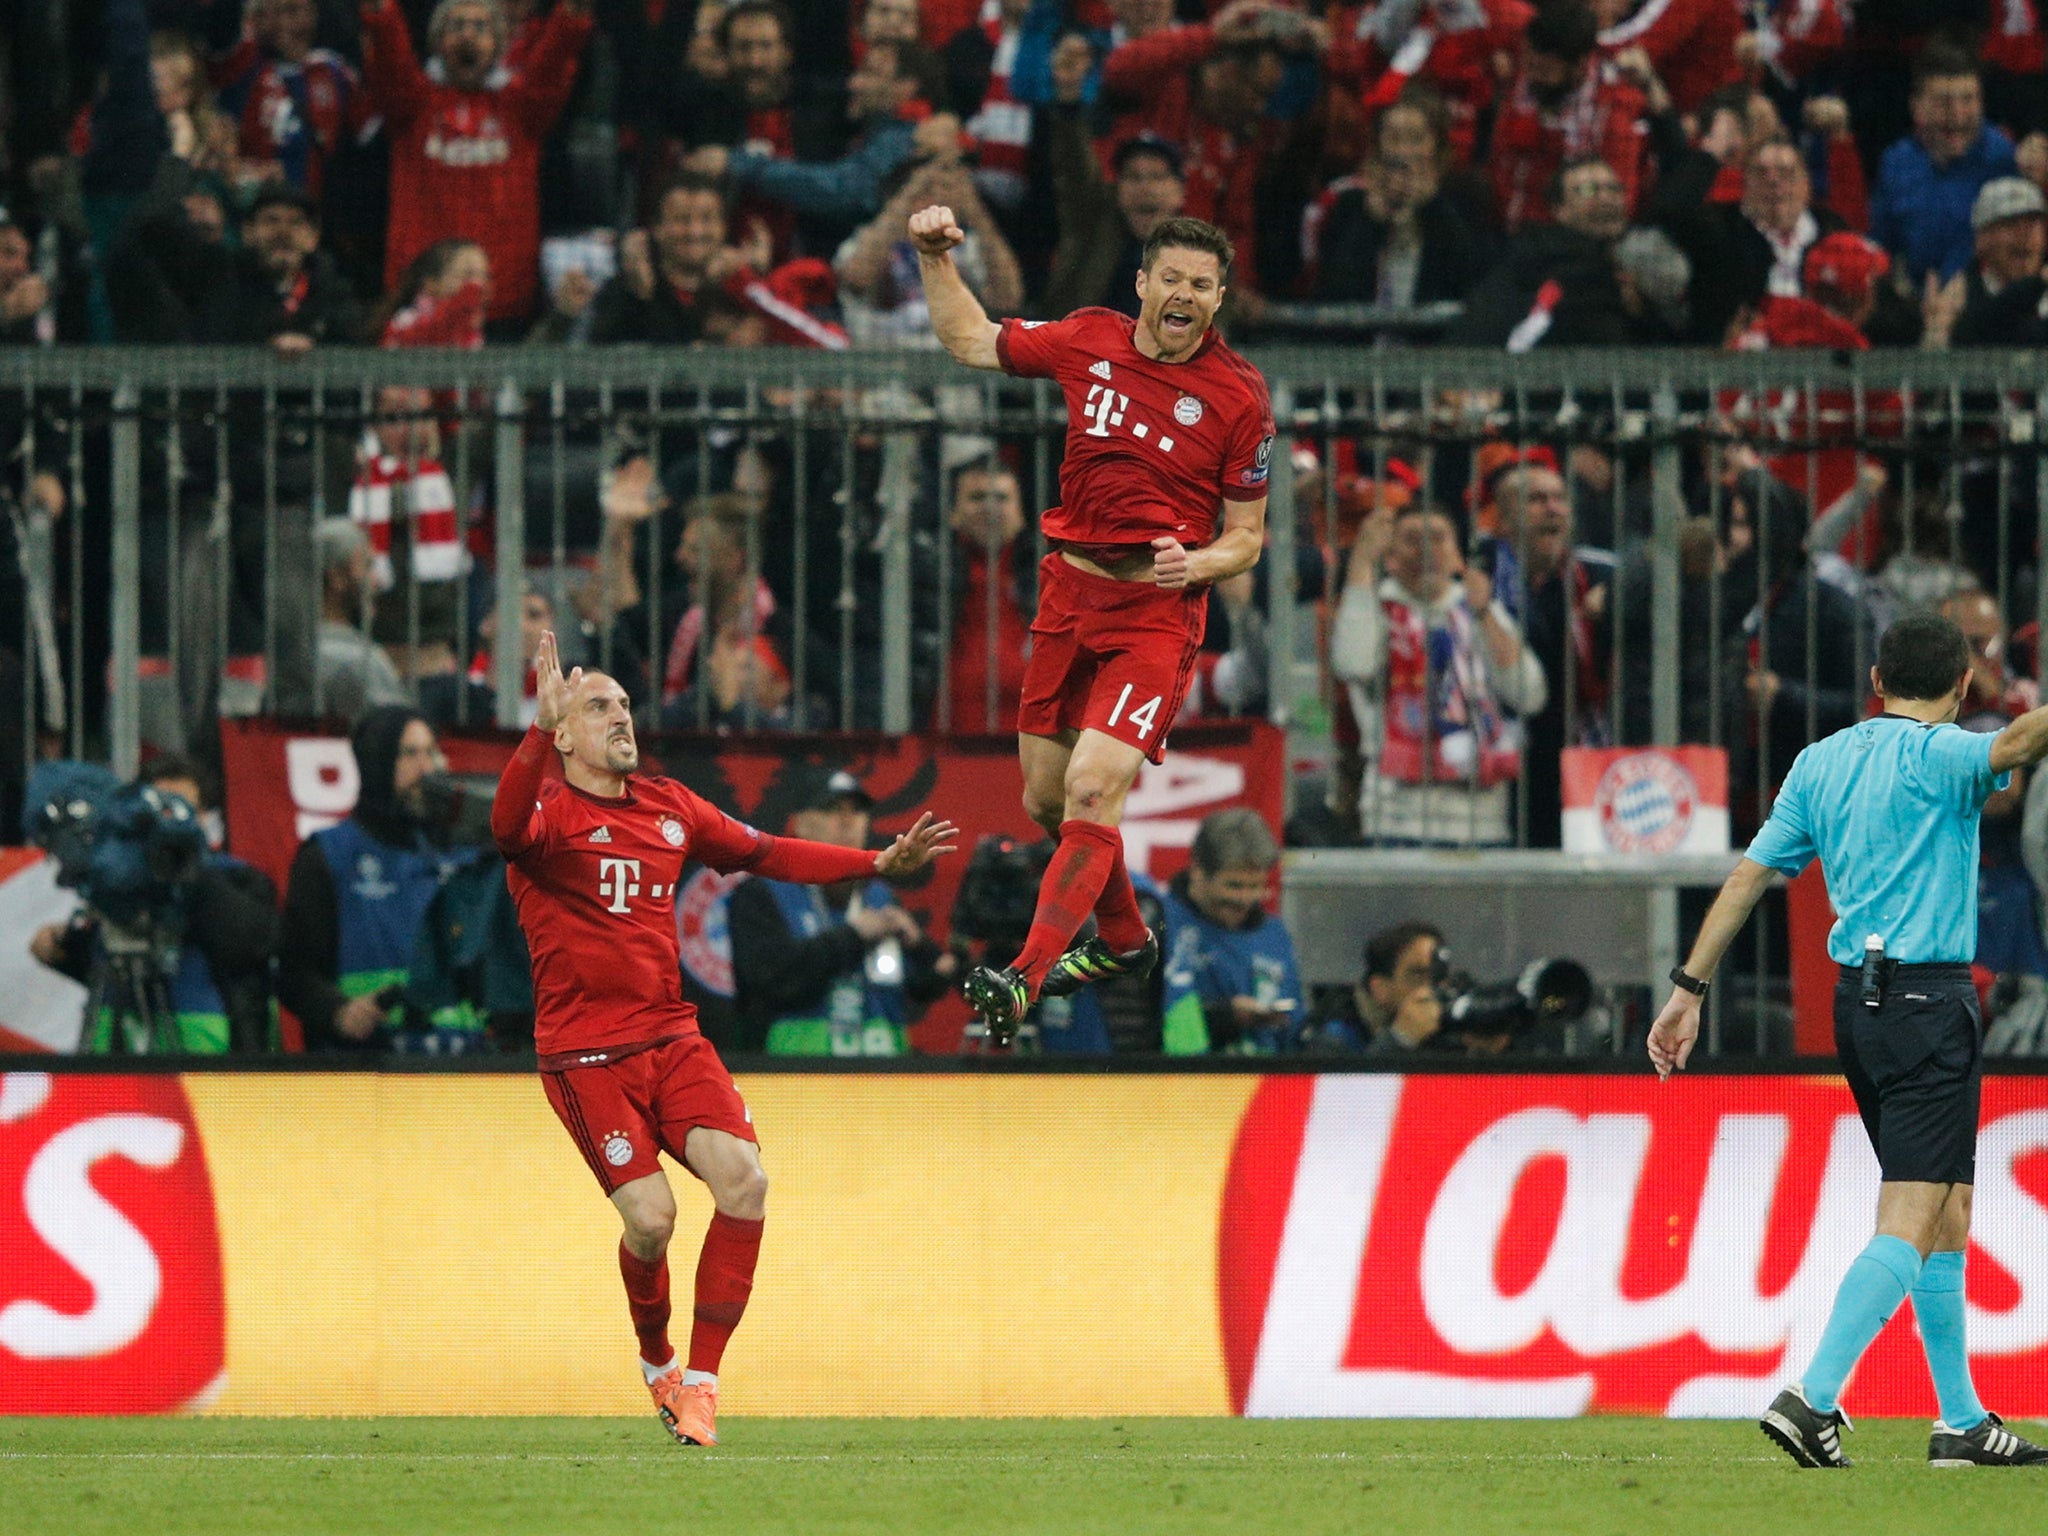 Xabi Alonso opened the scoring with a deflected free-kick